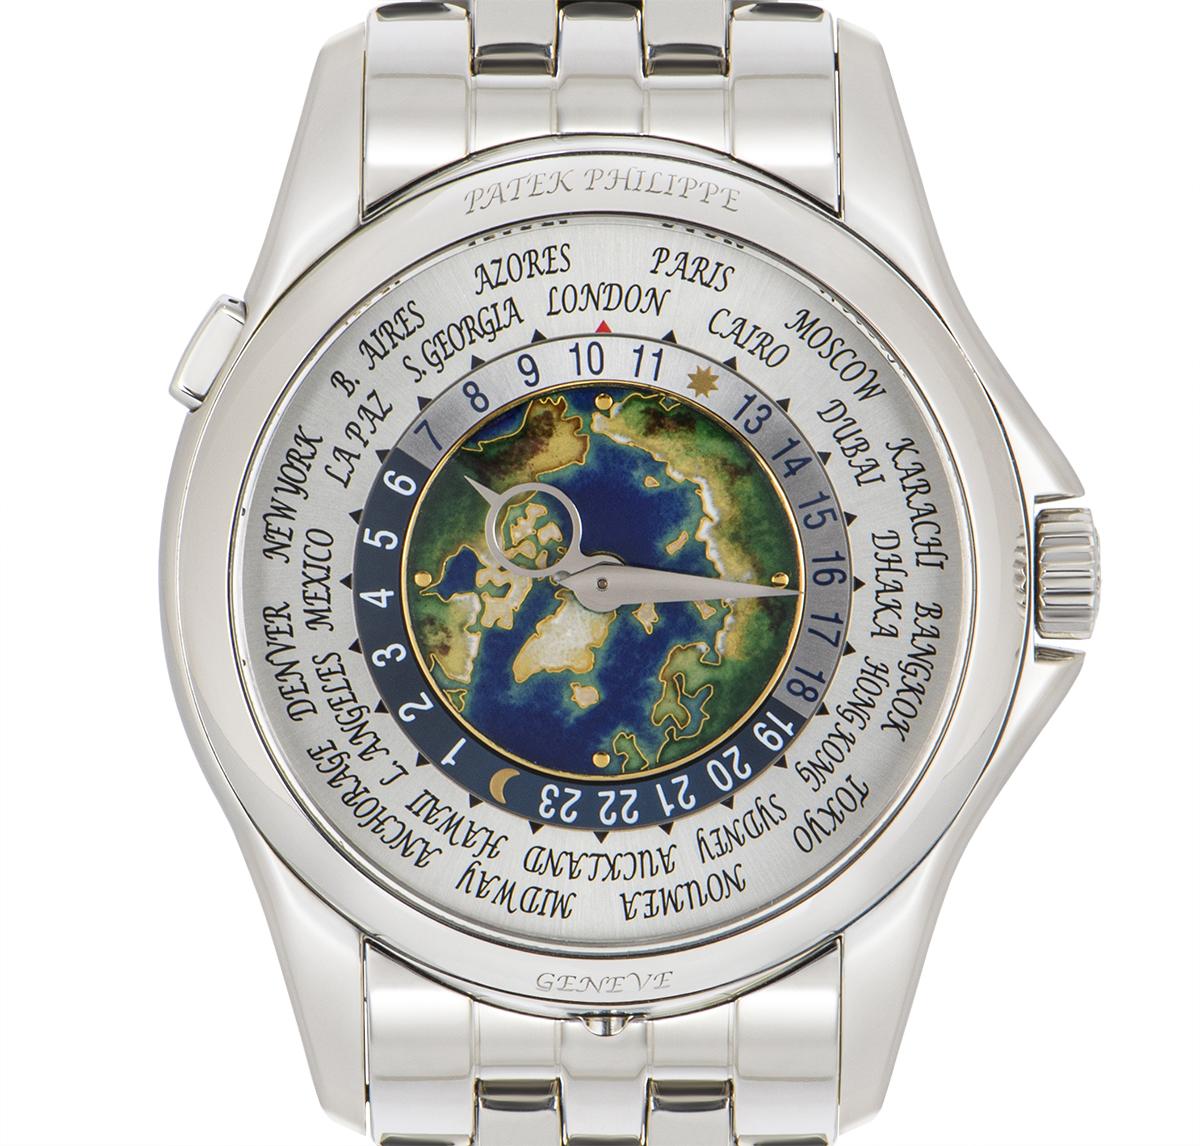 A 39.5 mm platinum World Time with complications by Patek Philippe. Featuring a silver dial with a cloisonne enamel centre. The dial itself features a 24-hour display and the time of 24 worldwide locations. Set just beneath the case at 6 o'clock is